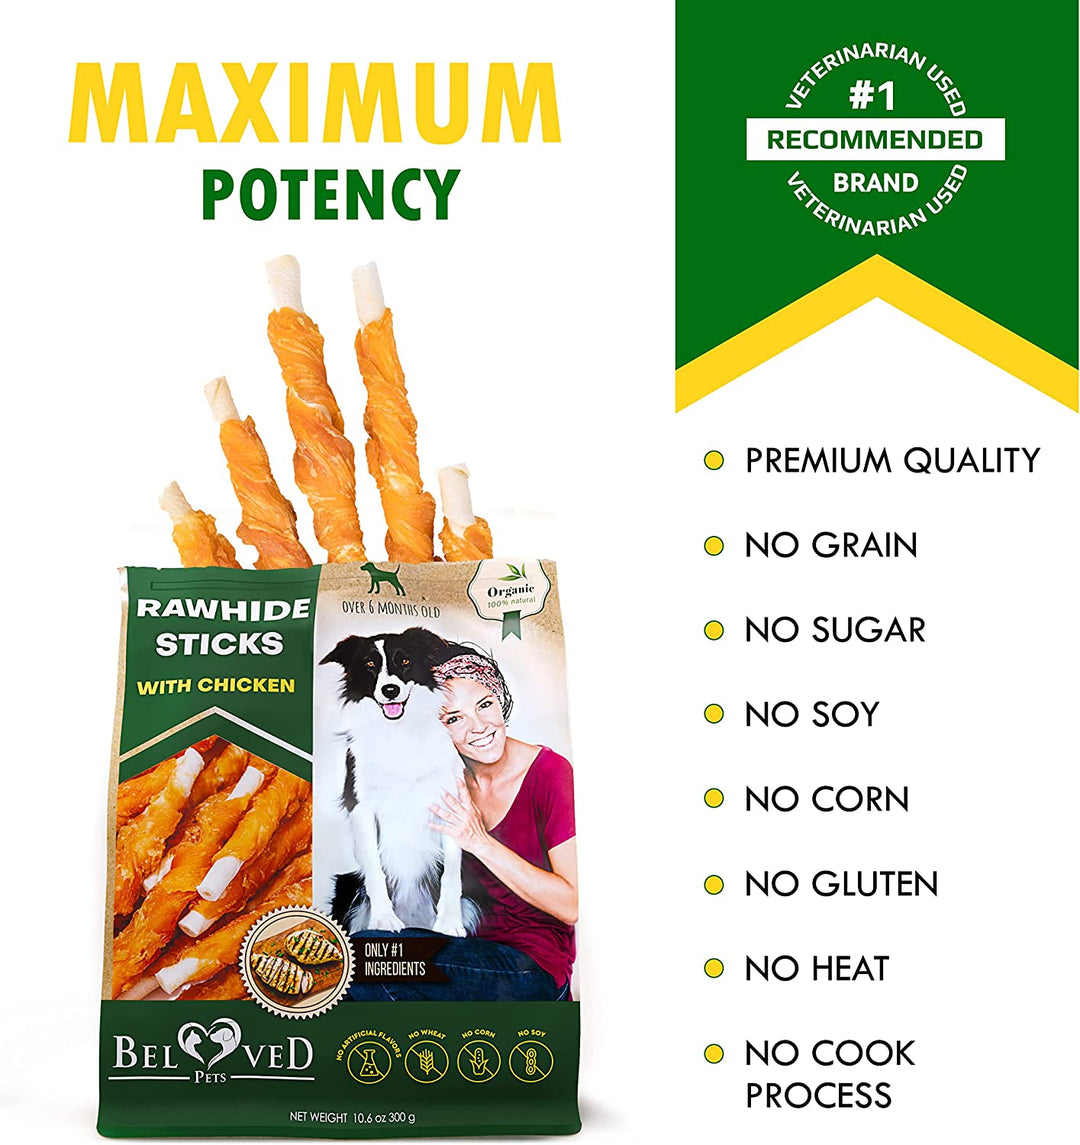 Dog Rawhide Sticks Wrapped with Chicken & Pet Natural Chew Treats - Grain Free Organic Meat & Human Grade Dried Snacks in Bulk - Best Twists for Training Small & Large Dogs - Made for USA (Chicken)